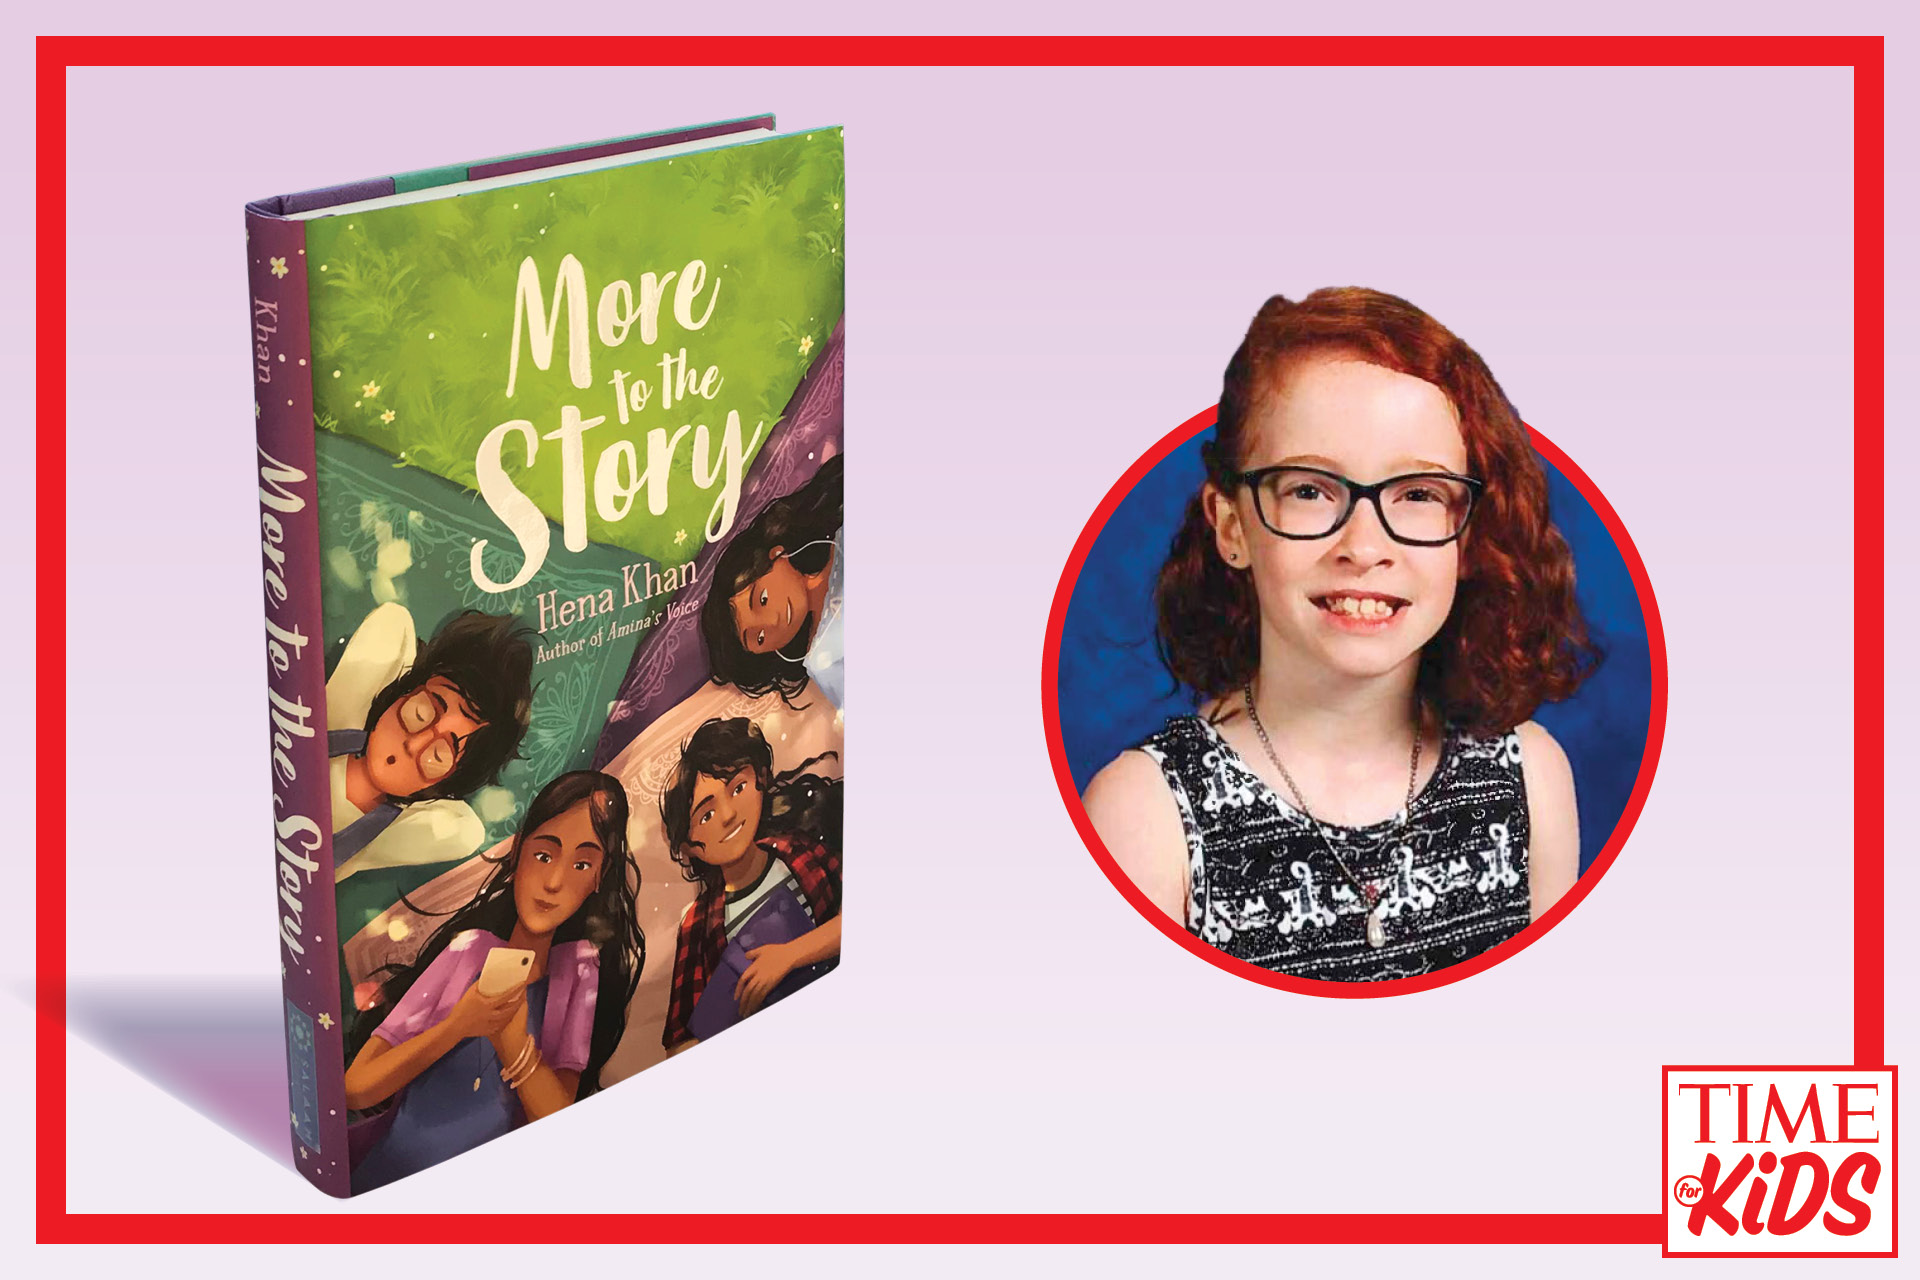 TFK Kid Reporter Mira McInnes Reviews More to the Story by Hena Khan